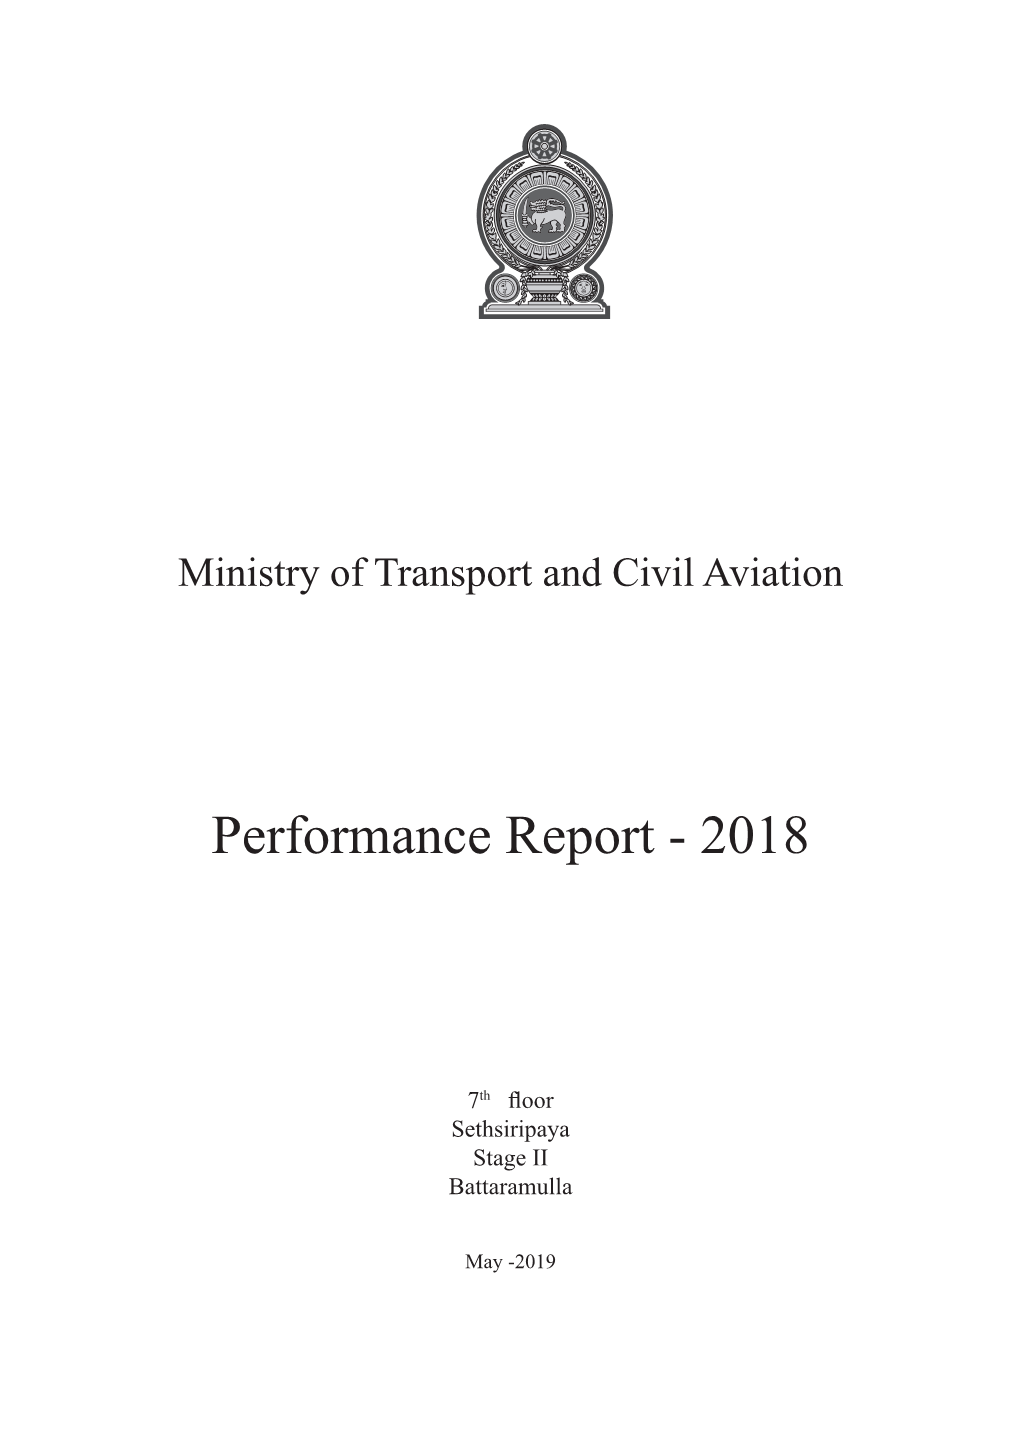 Performance Report of the Ministry of Transport and Civil Aviation for The